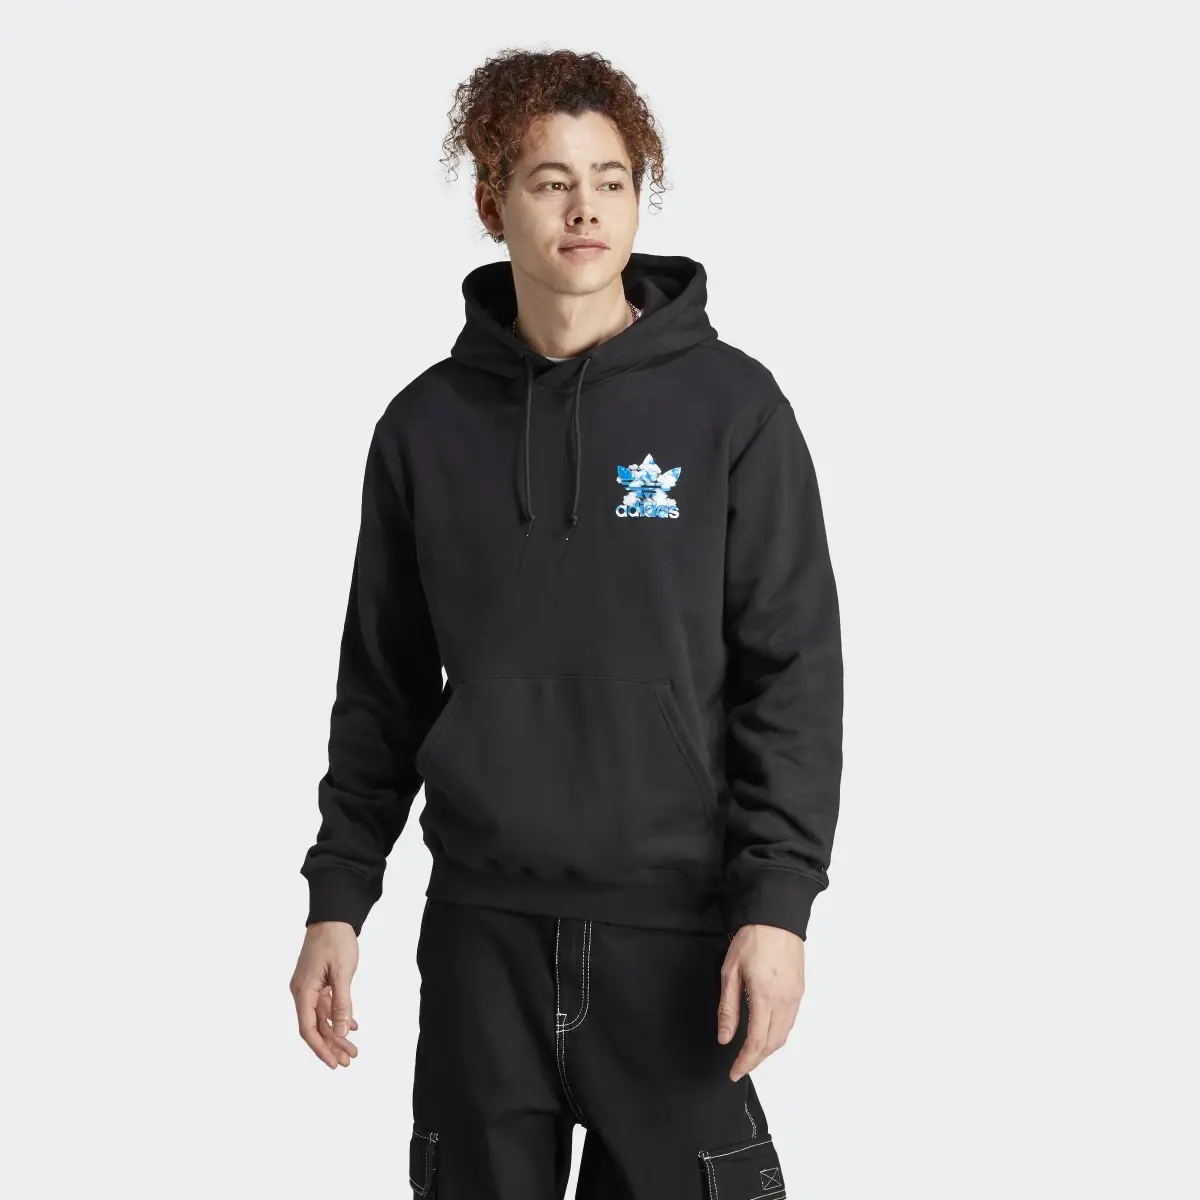 Adidas Graphics Cloudy Trefoil Hoodie. 2